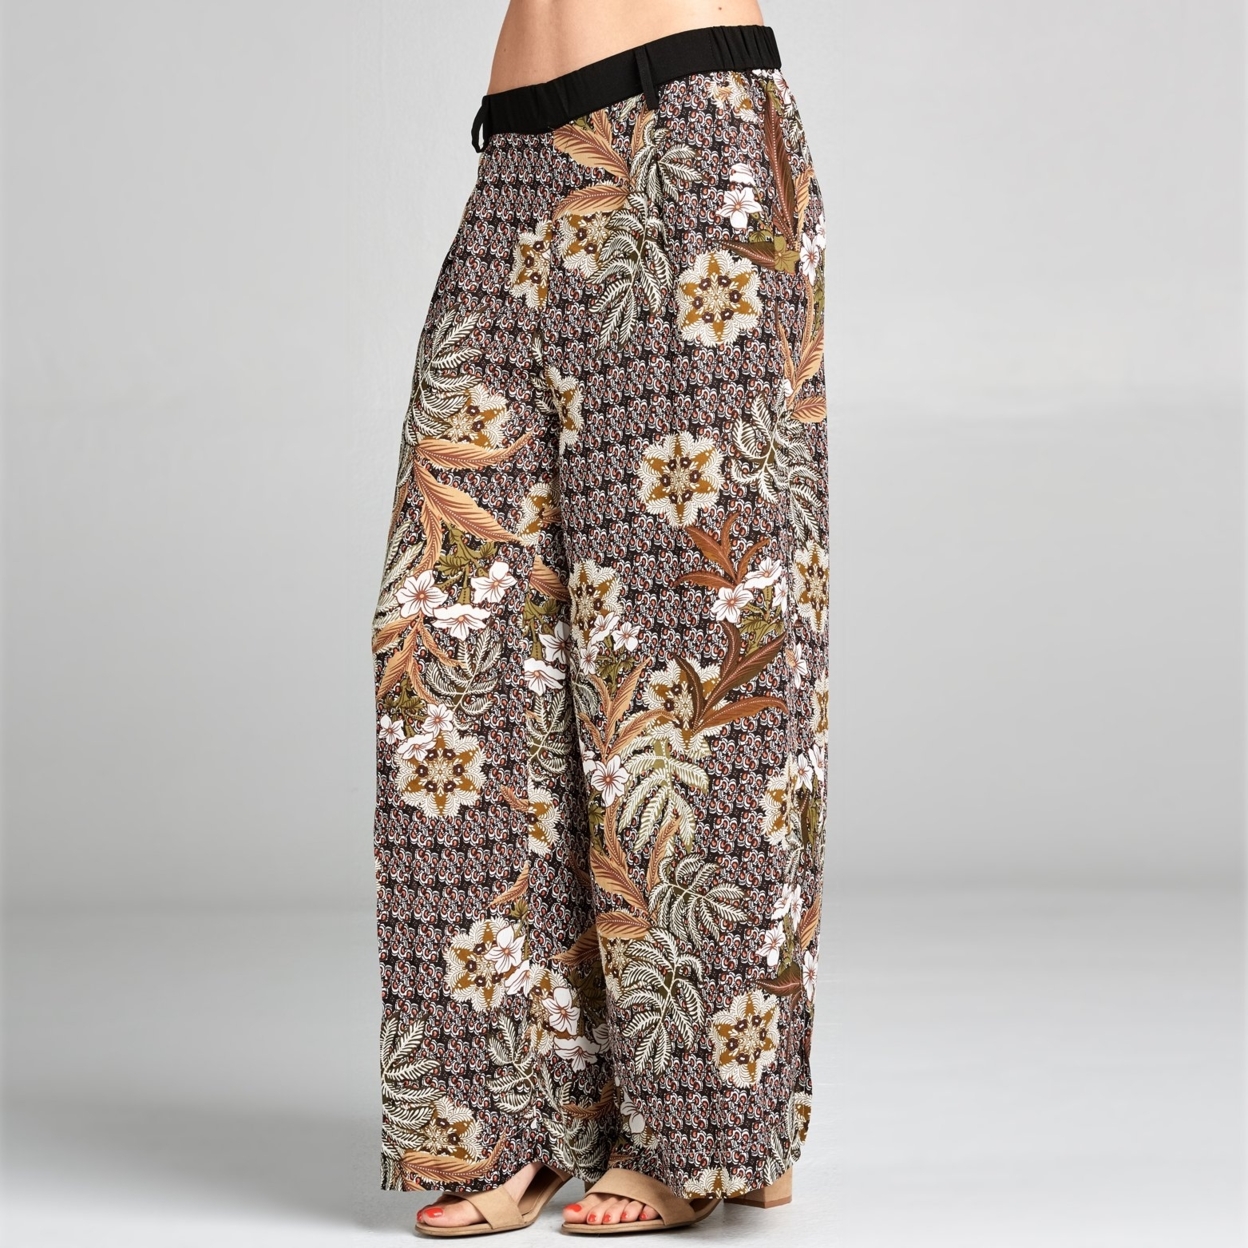 Olive Floral Palazzo Pants - Olive, Small (2-6)